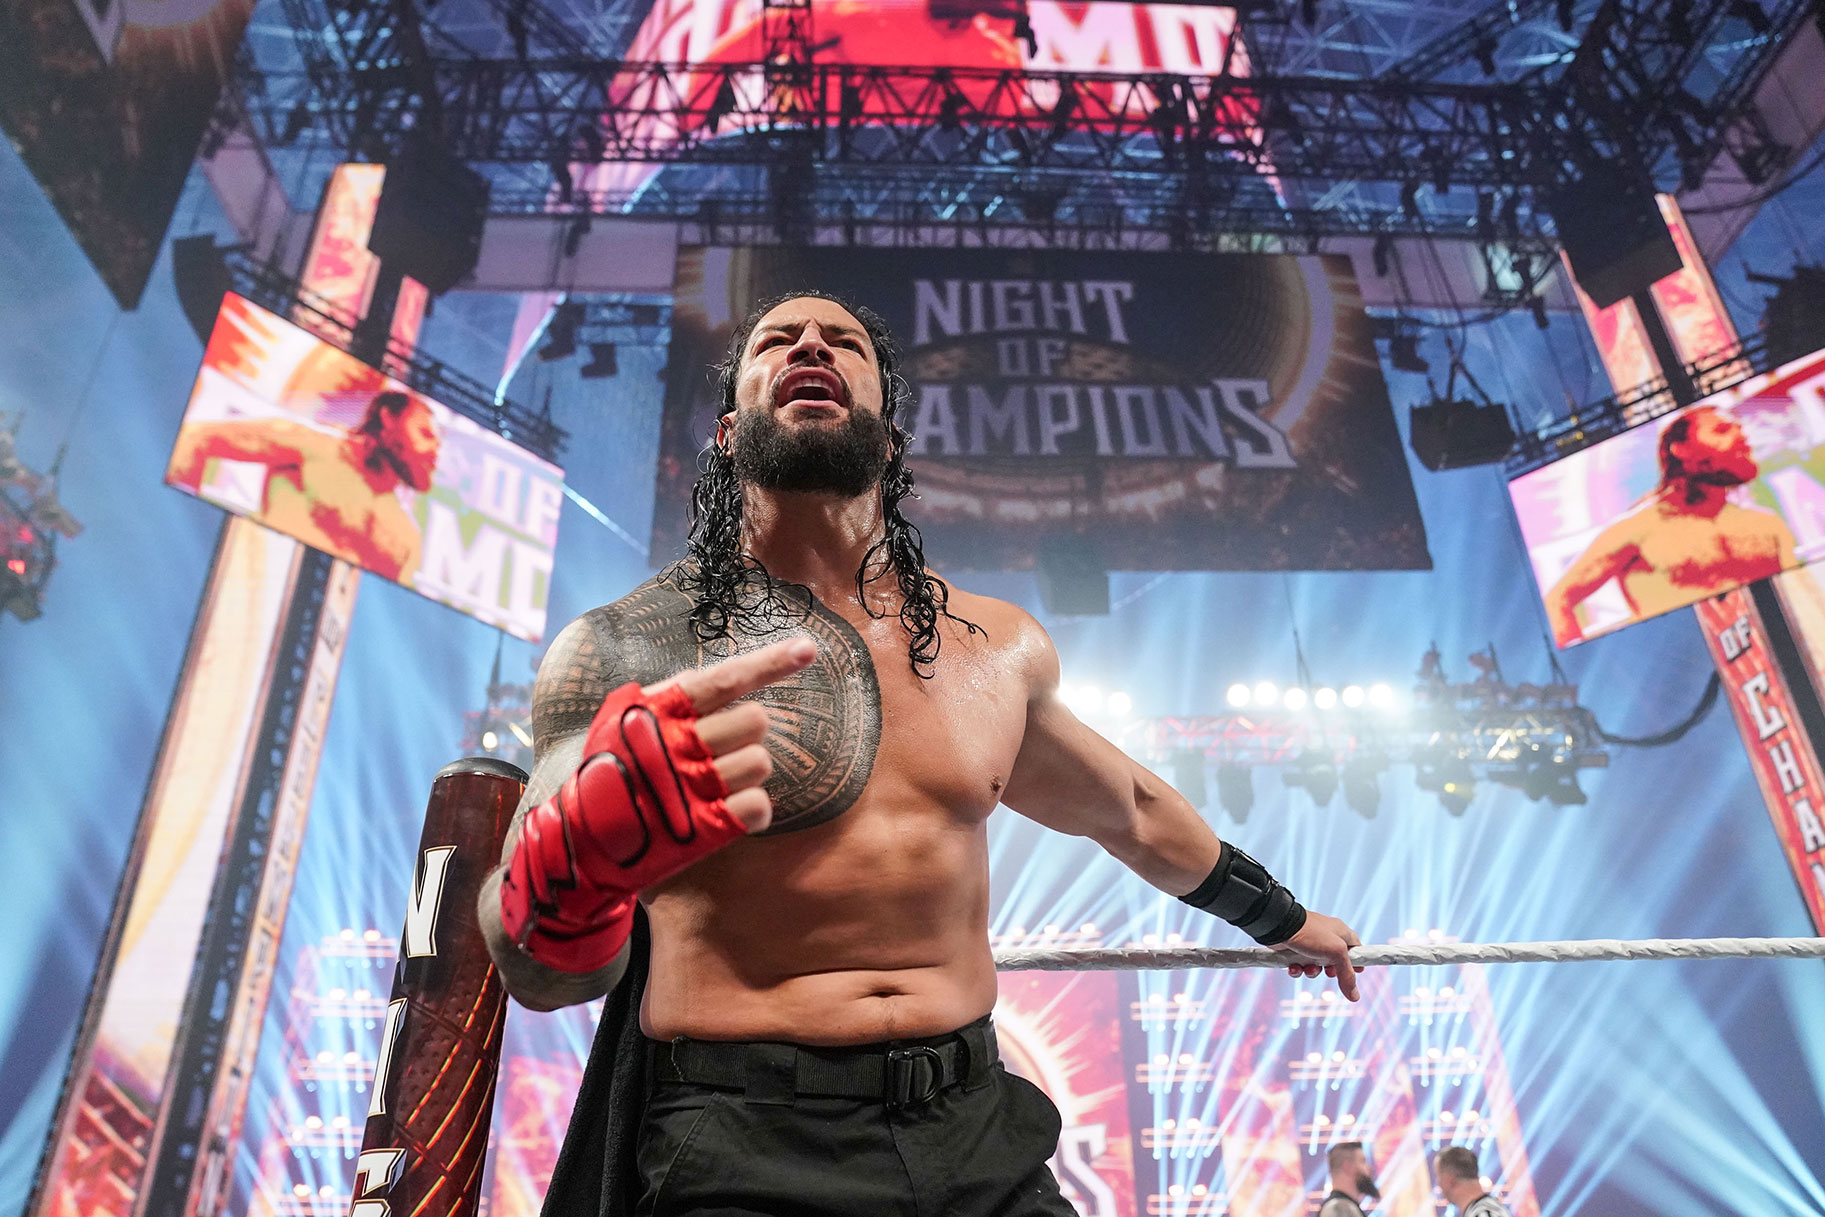 What's Next for Roman Reigns After WWE Night of Champions? | USA Insider